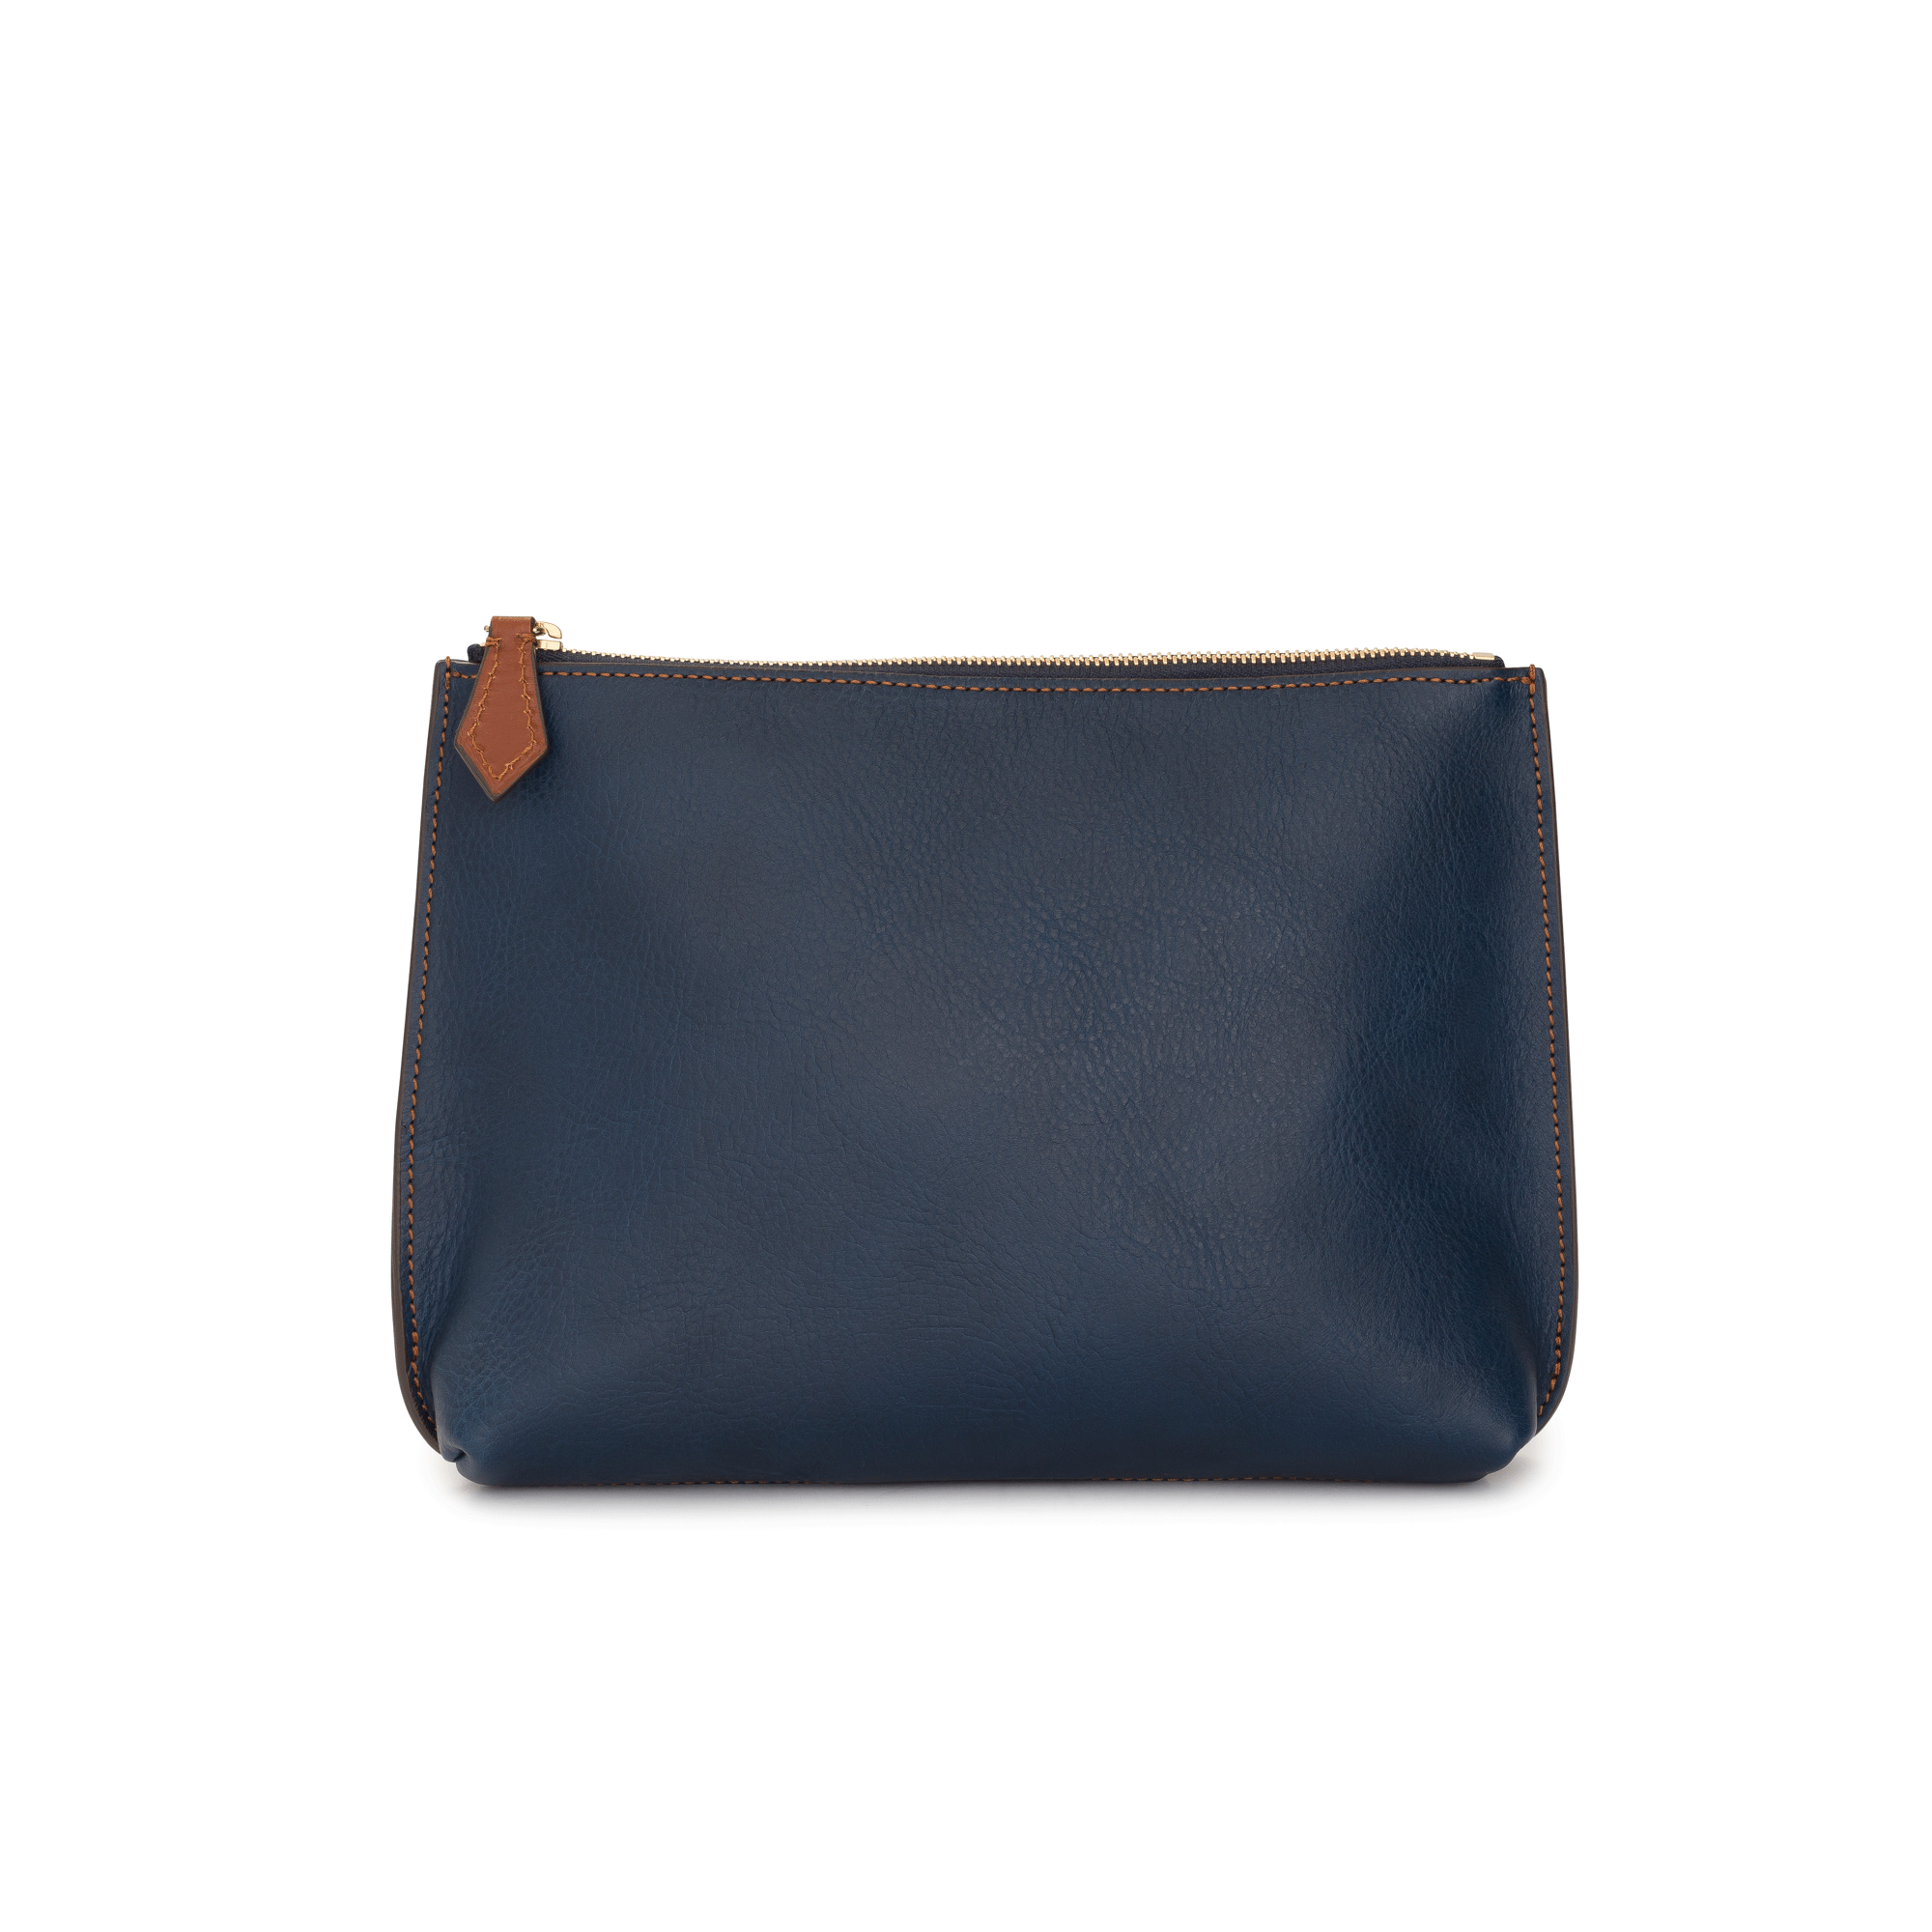 The Classic Cross-Body Bag in Blue and Gold